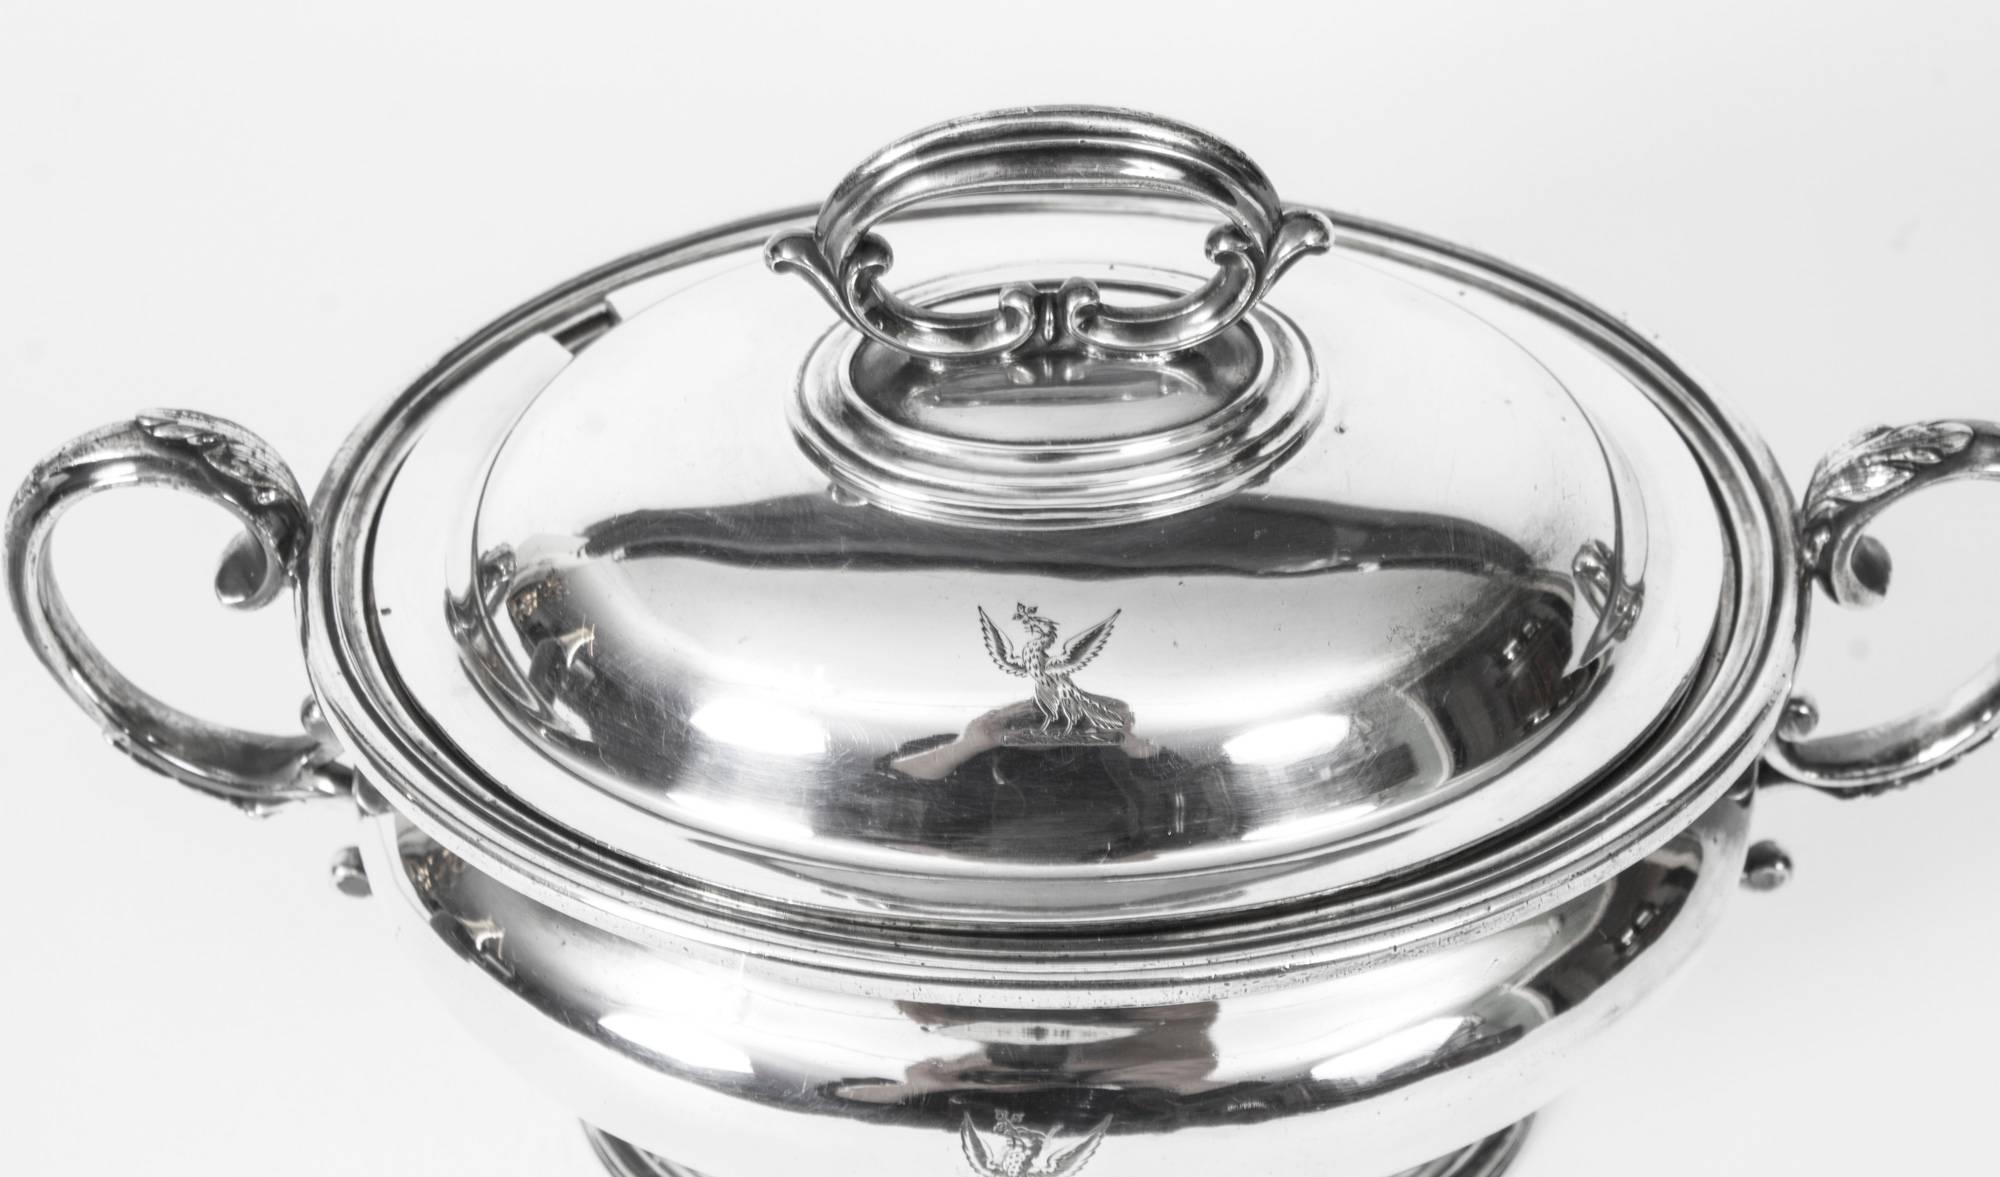 This is an exquisite and rare antique pair of English silver plate sauce tureens and covers with liners and twin handles, circa 1860 in date.

They are of the highest quality, in excellent condition and are ready to grace your dining table, the